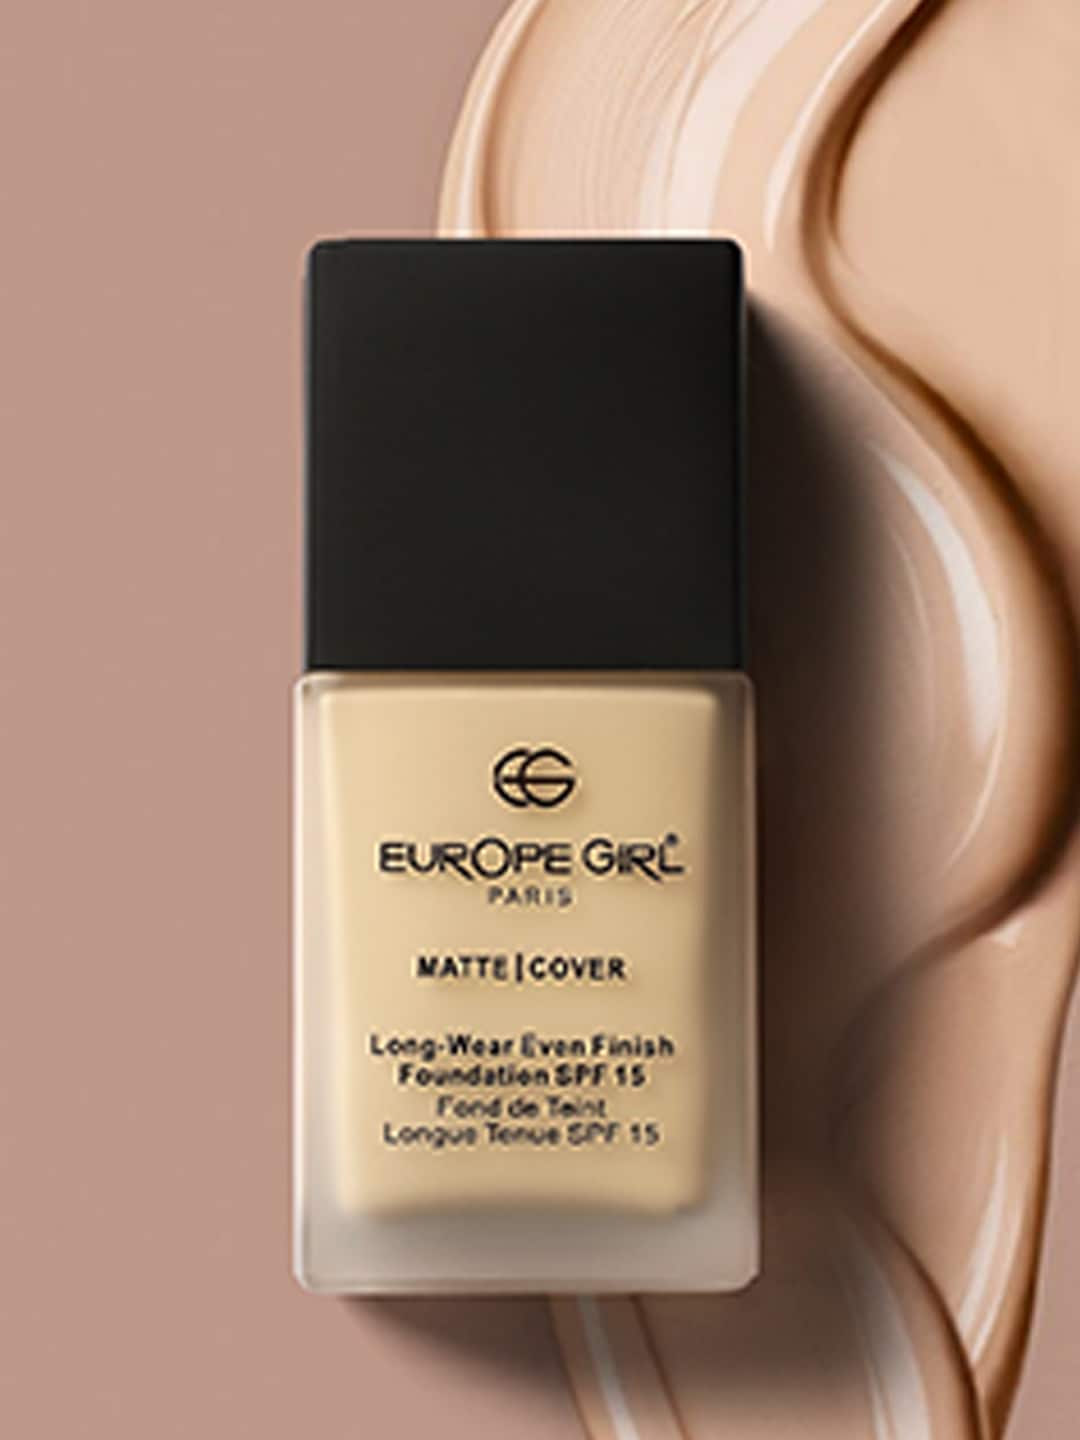 EUROPE GIRL Matte Cover Long Wear SPF 15 Even Finish Foundation 30 ml - Shade 120 Price in India